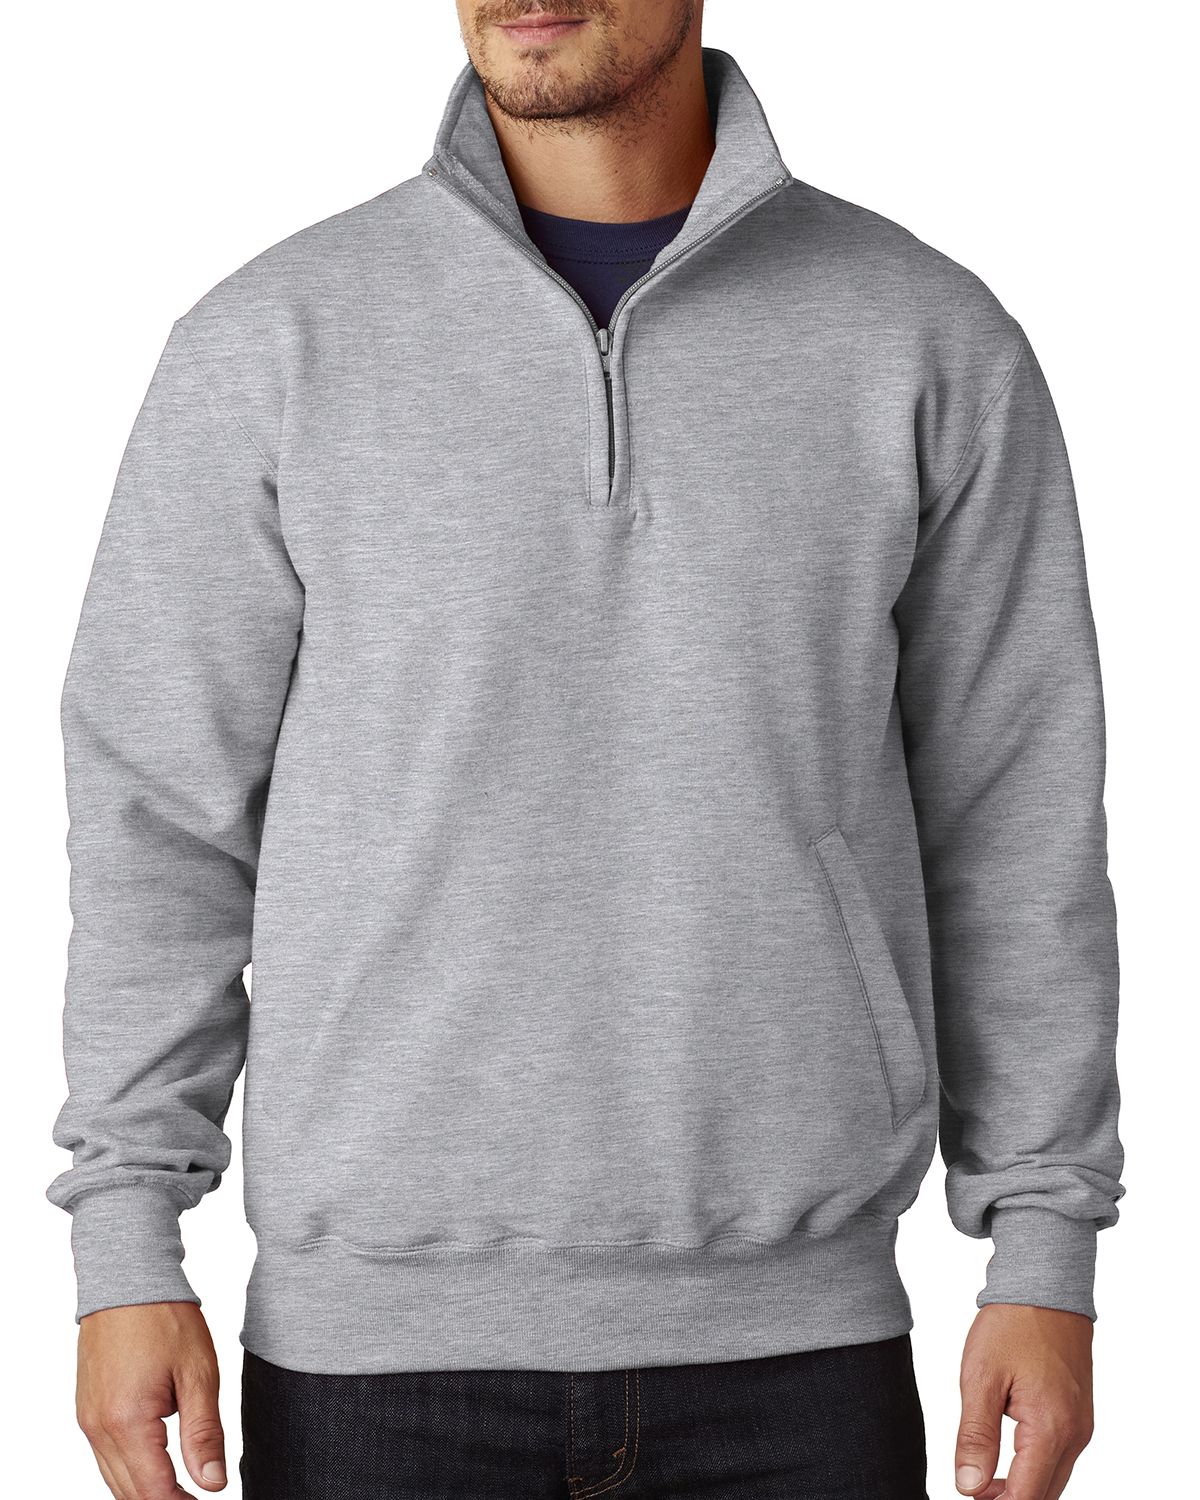 Champion S400 Adult Double Dry 1/4-Zip Pullover Fleece $27.30 - Outerwear